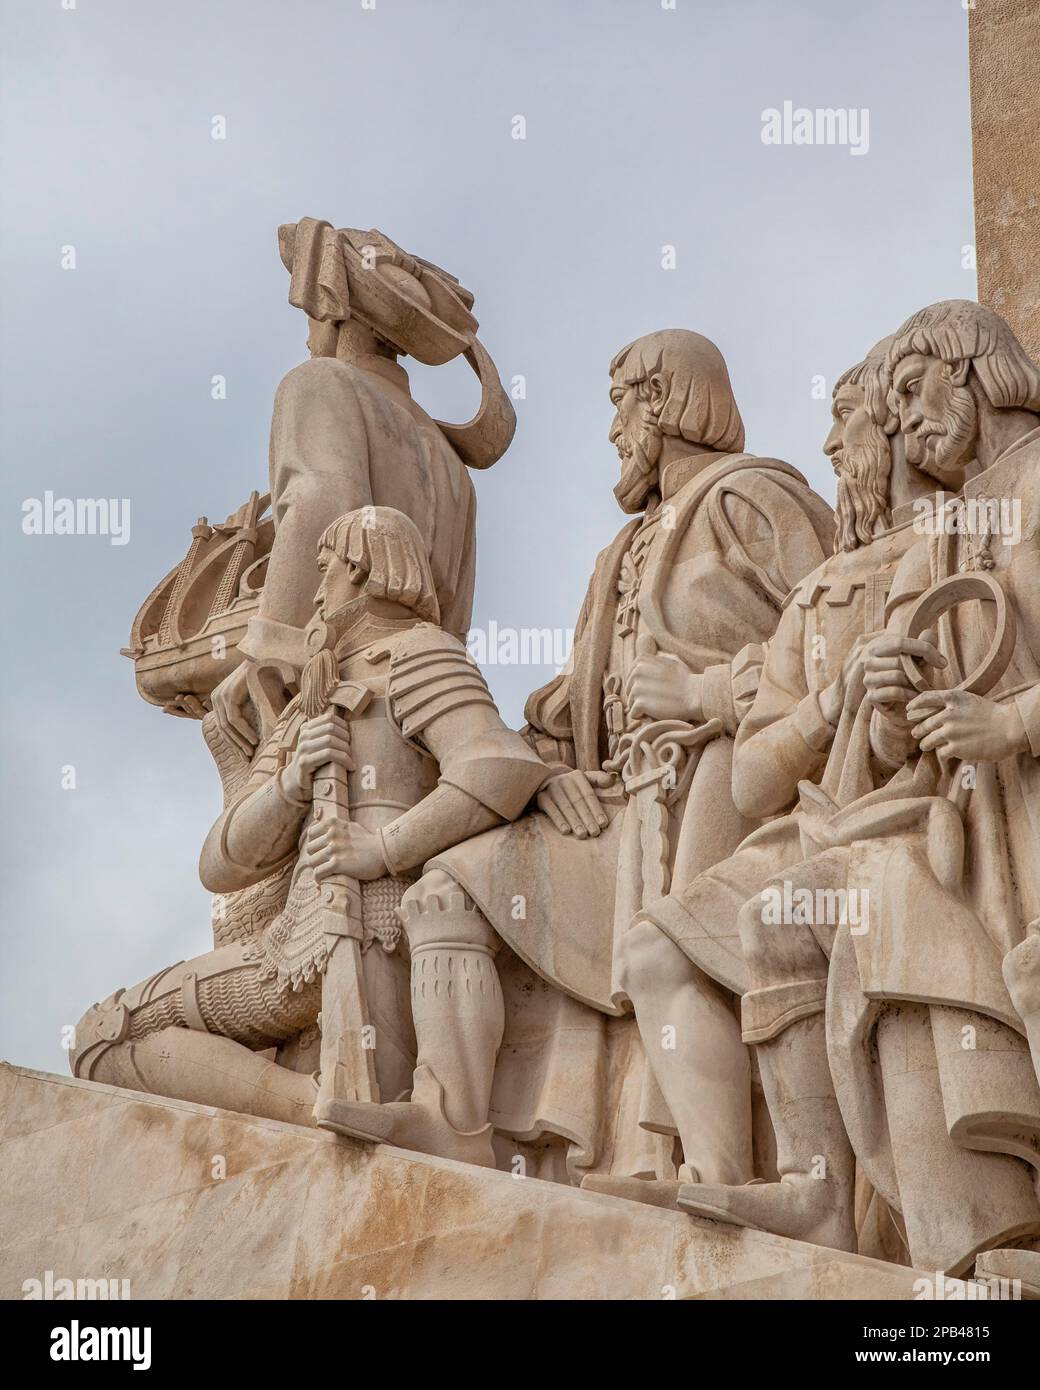 Monument to the Discoveries in Belém, Lisbon Stock Photo